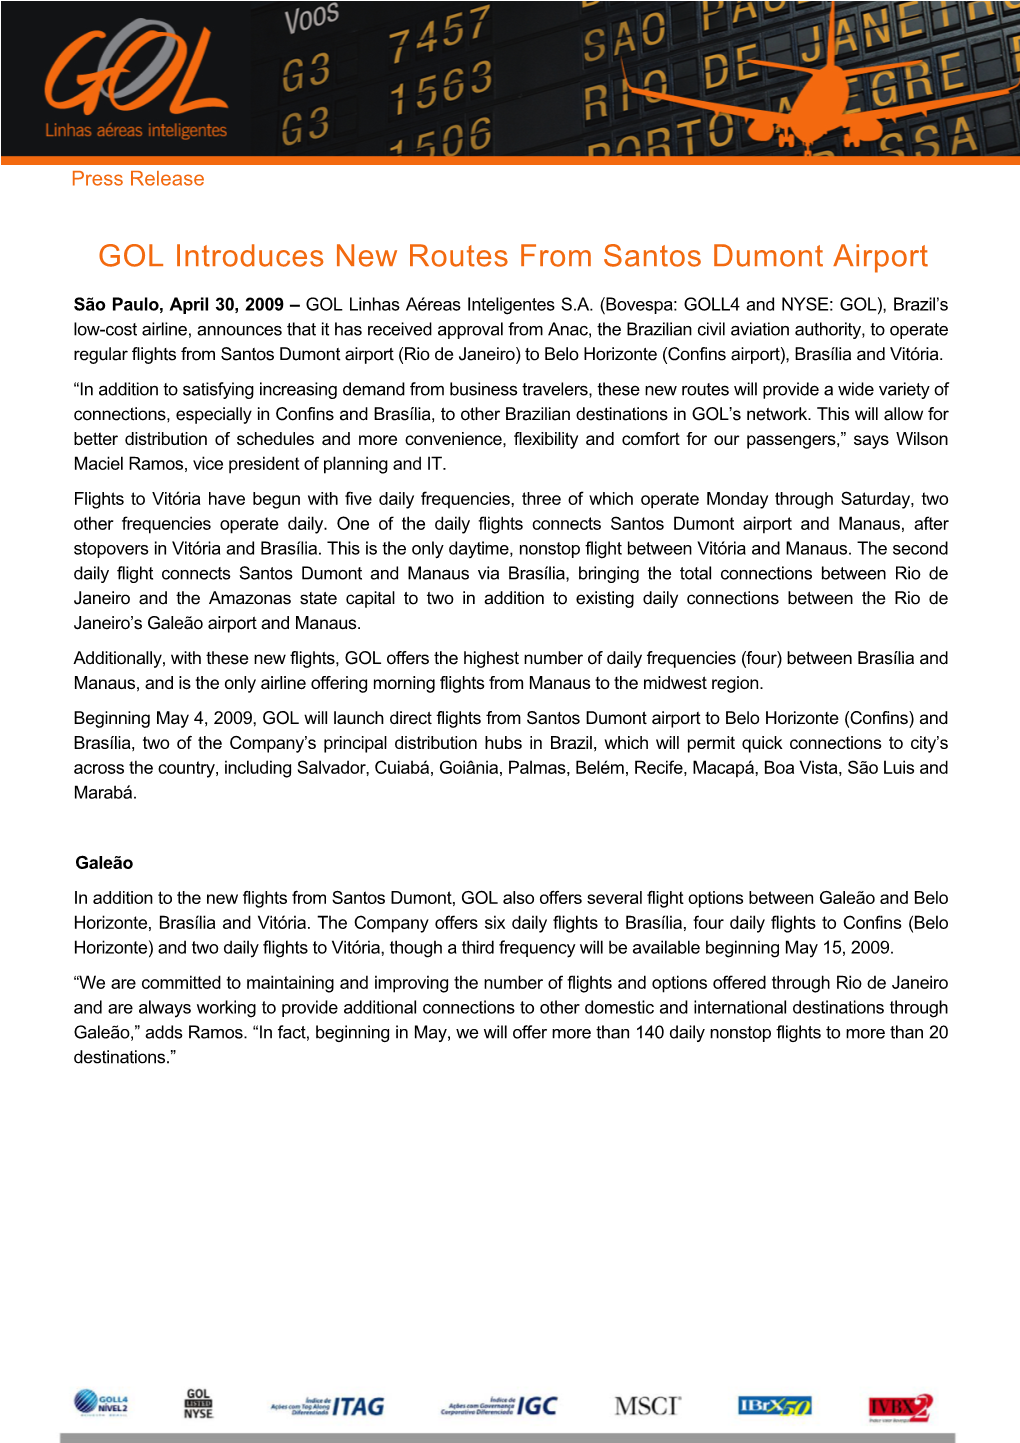 GOL Introduces New Routes from Santos Dumont Airport